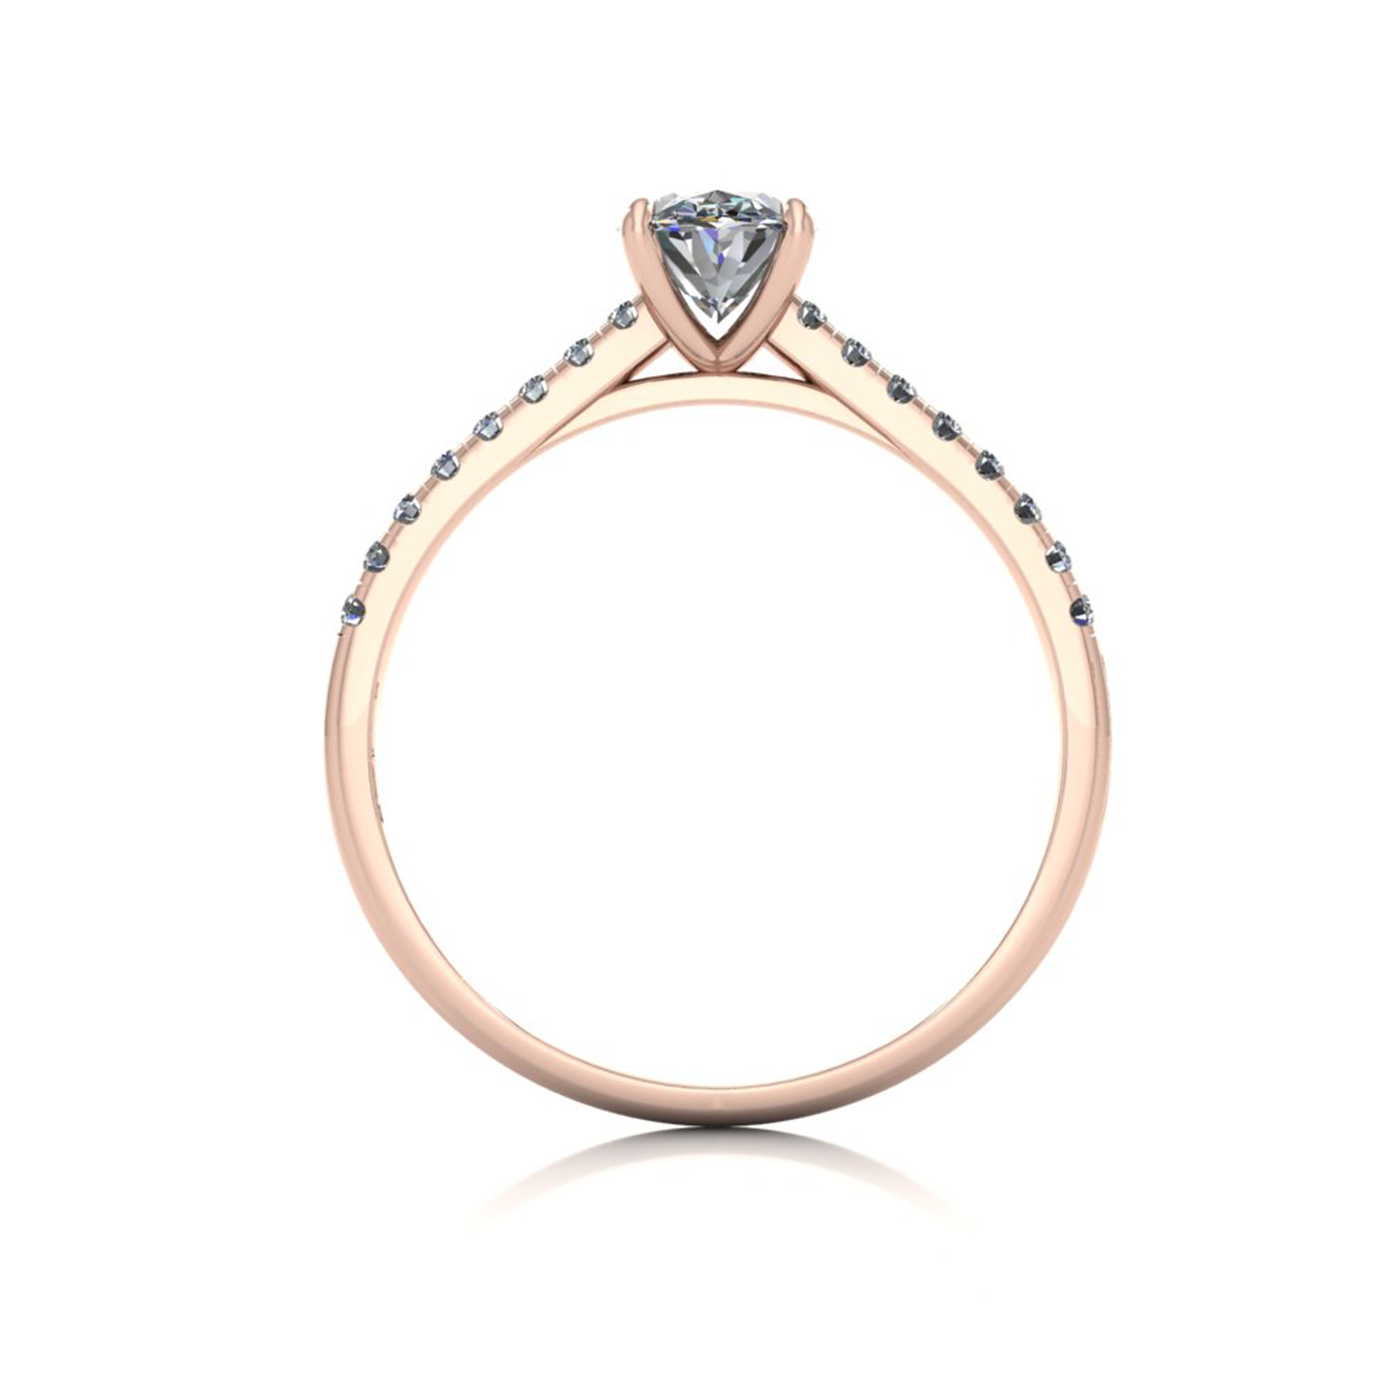 18k rose gold  0,80 ct 4 prongs oval cut diamond engagement ring with whisper thin pavÉ set band Photos & images